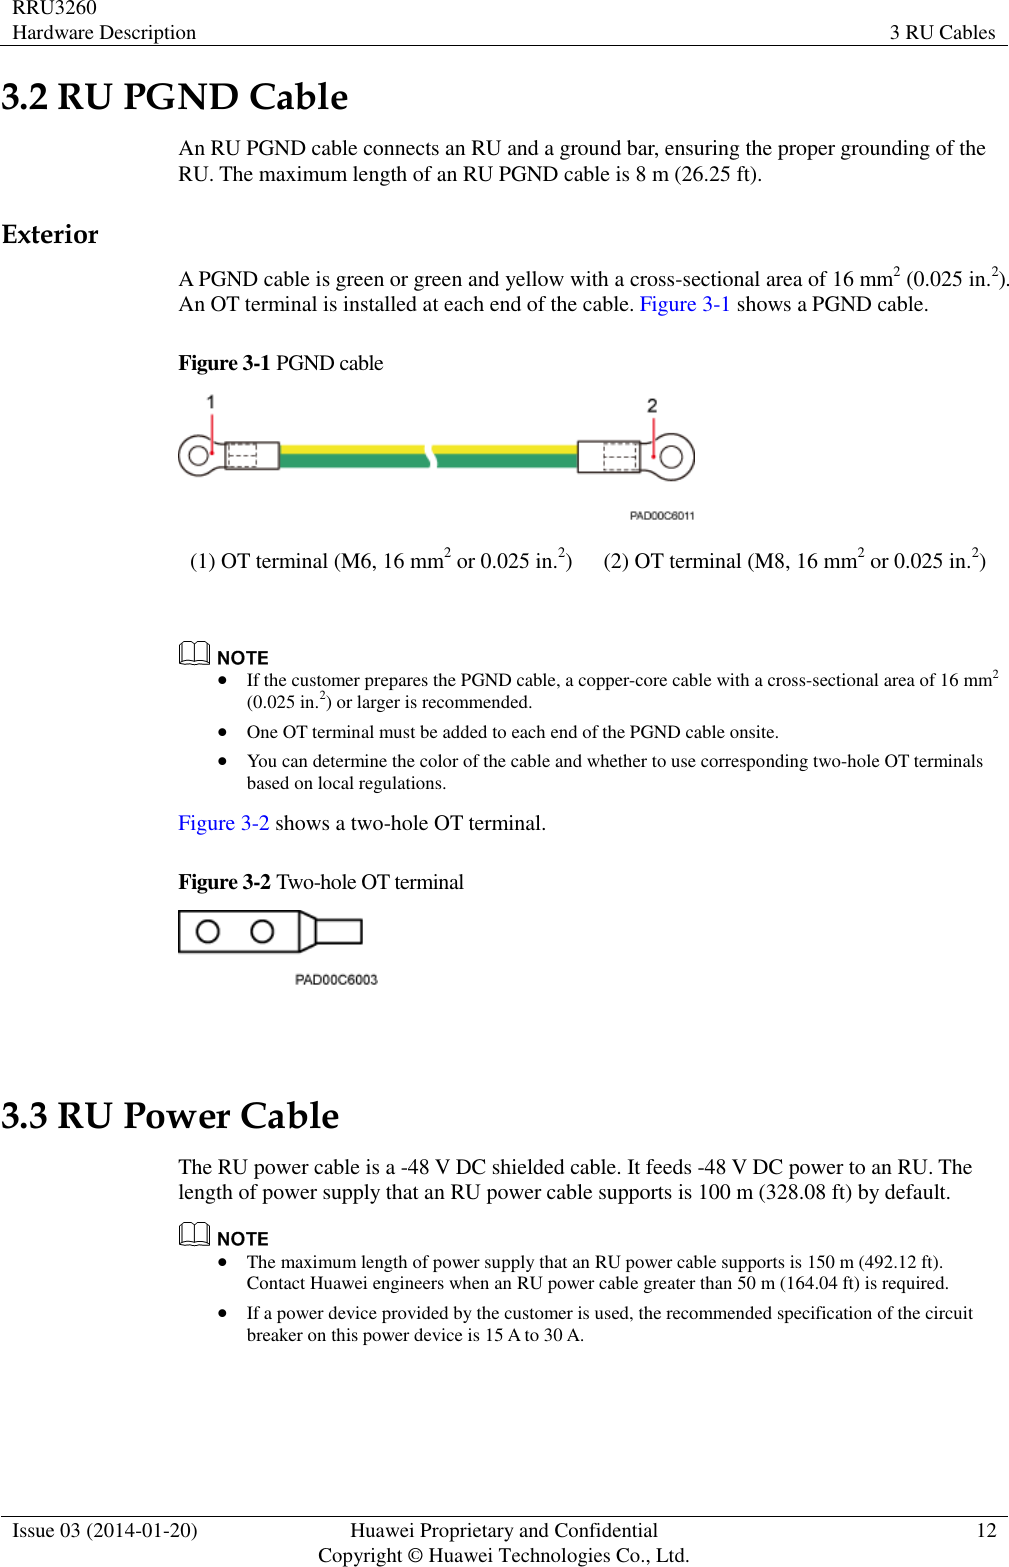 RRU3260 Hardware Description 3 RU Cables  Issue 03 (2014-01-20) Huawei Proprietary and Confidential                                     Copyright © Huawei Technologies Co., Ltd. 12  3.2 RU PGND Cable An RU PGND cable connects an RU and a ground bar, ensuring the proper grounding of the RU. The maximum length of an RU PGND cable is 8 m (26.25 ft). Exterior A PGND cable is green or green and yellow with a cross-sectional area of 16 mm2 (0.025 in.2). An OT terminal is installed at each end of the cable. Figure 3-1 shows a PGND cable. Figure 3-1 PGND cable  (1) OT terminal (M6, 16 mm2 or 0.025 in.2) (2) OT terminal (M8, 16 mm2 or 0.025 in.2)    If the customer prepares the PGND cable, a copper-core cable with a cross-sectional area of 16 mm2 (0.025 in.2) or larger is recommended.  One OT terminal must be added to each end of the PGND cable onsite.  You can determine the color of the cable and whether to use corresponding two-hole OT terminals based on local regulations. Figure 3-2 shows a two-hole OT terminal. Figure 3-2 Two-hole OT terminal   3.3 RU Power Cable The RU power cable is a -48 V DC shielded cable. It feeds -48 V DC power to an RU. The length of power supply that an RU power cable supports is 100 m (328.08 ft) by default.   The maximum length of power supply that an RU power cable supports is 150 m (492.12 ft). Contact Huawei engineers when an RU power cable greater than 50 m (164.04 ft) is required.    If a power device provided by the customer is used, the recommended specification of the circuit breaker on this power device is 15 A to 30 A. 